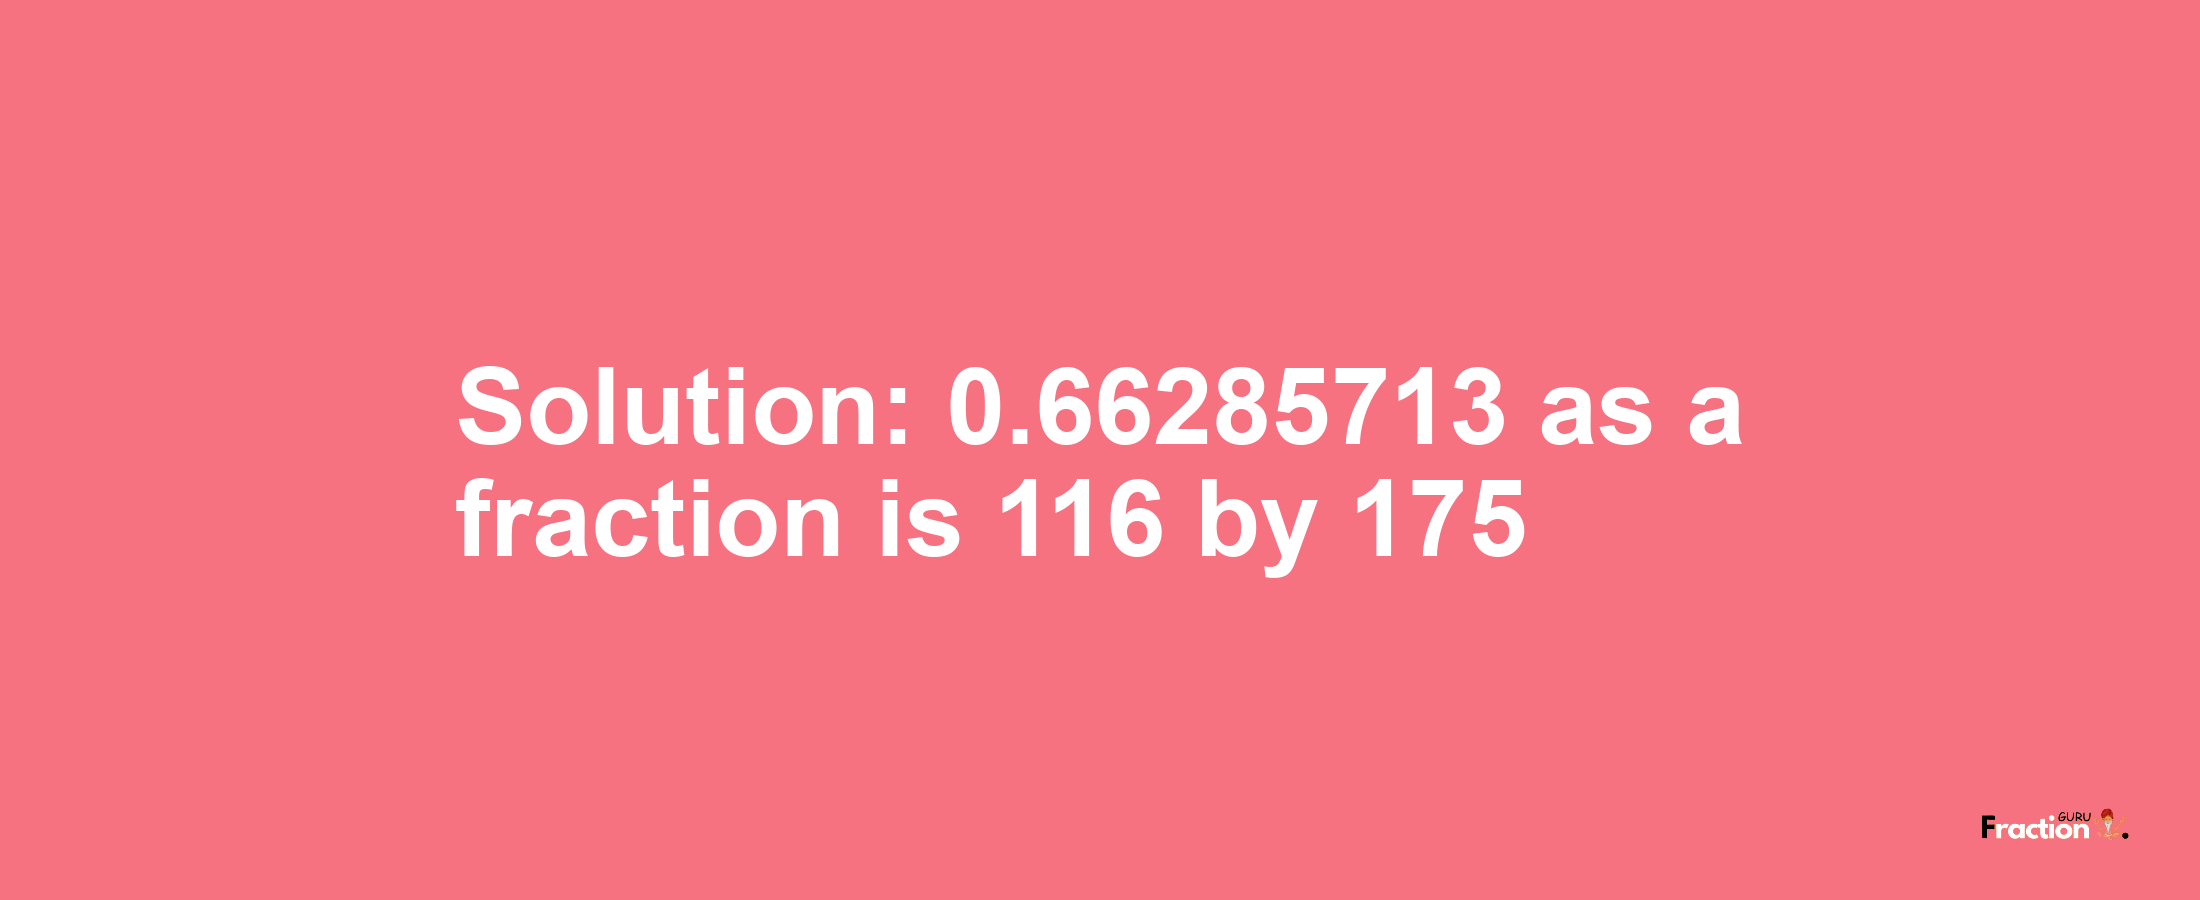 Solution:0.66285713 as a fraction is 116/175